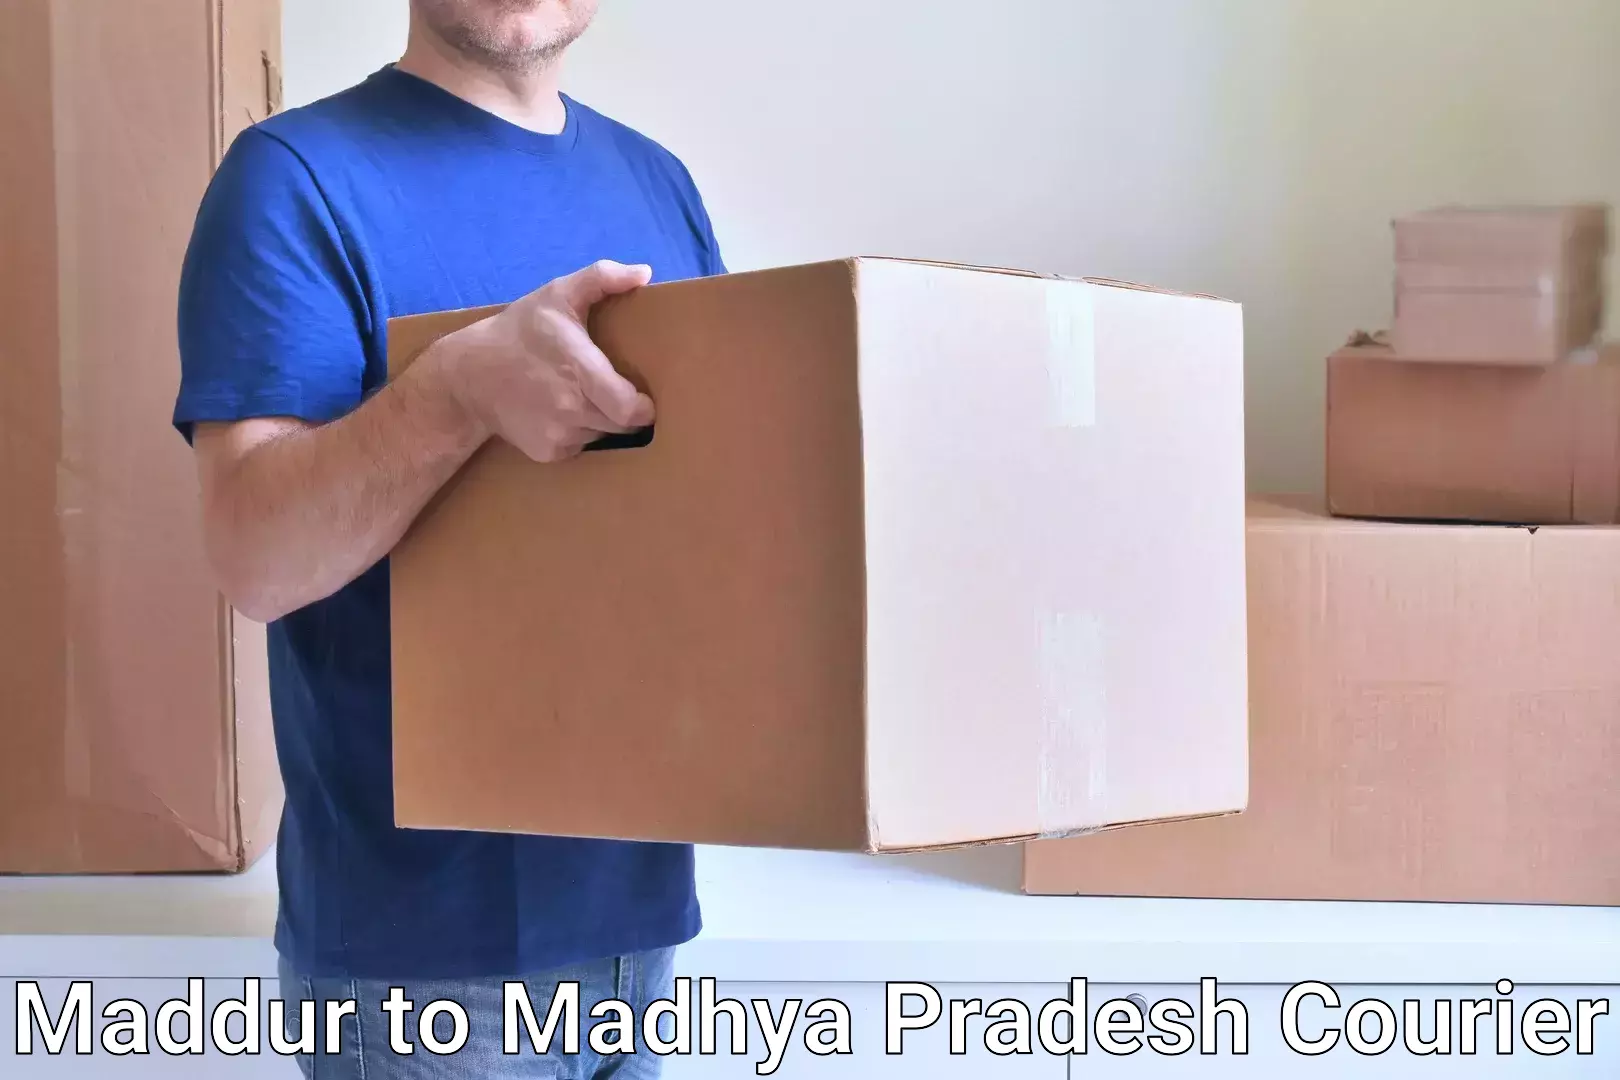 Personalized courier experiences Maddur to Ratlam